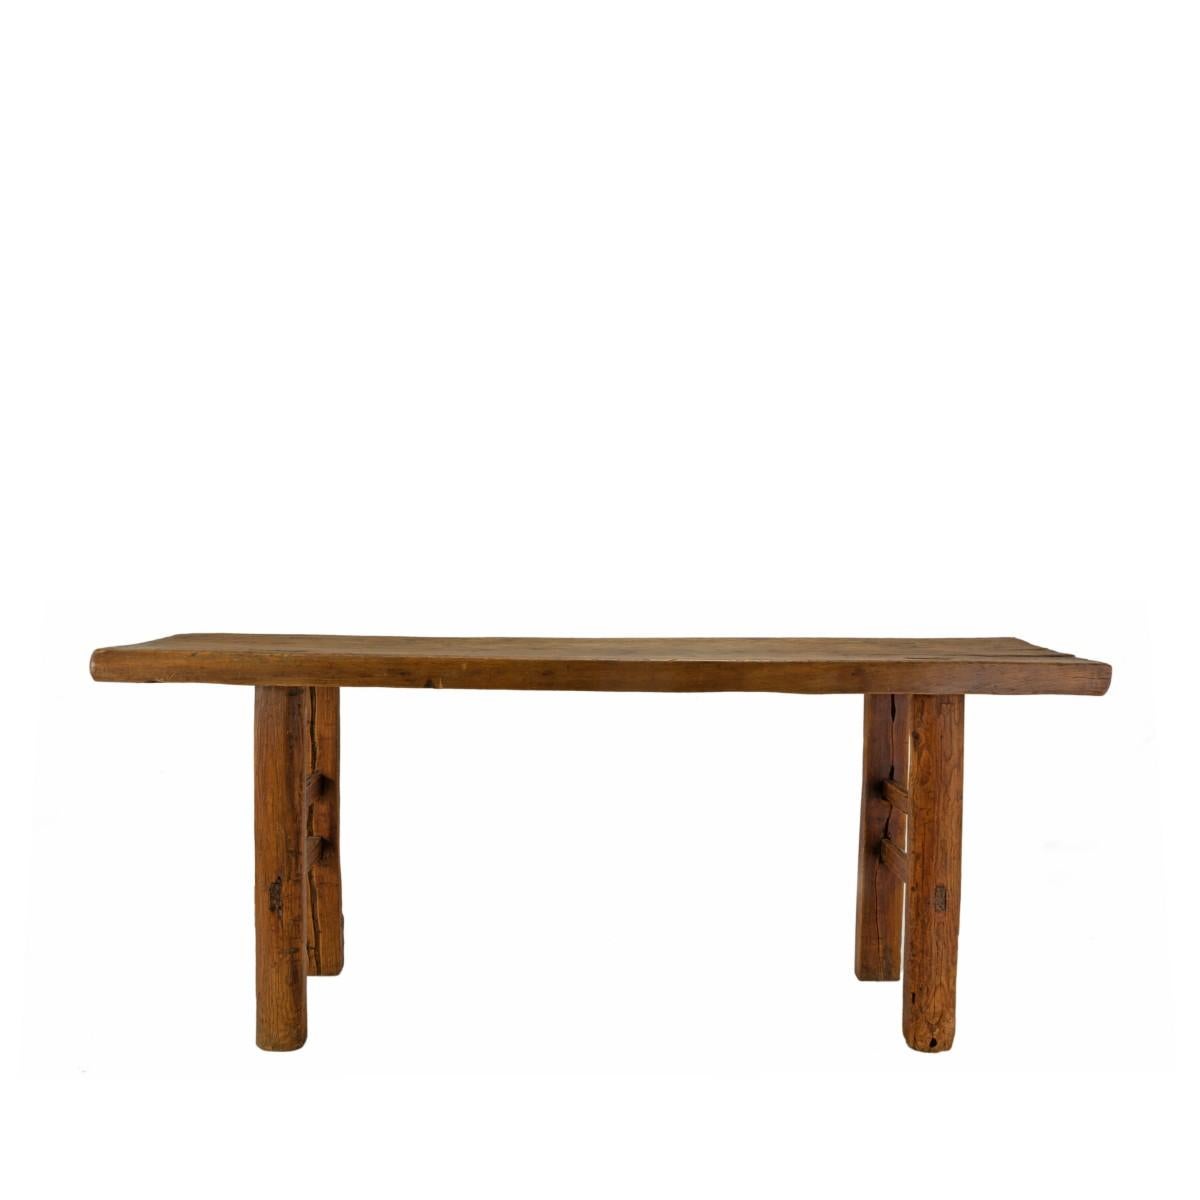 A rustic console table made of reclaimed wood, circa 1990. 

Dimensions: 74 inches L x 16.2 inches D x 31.2 inches H.